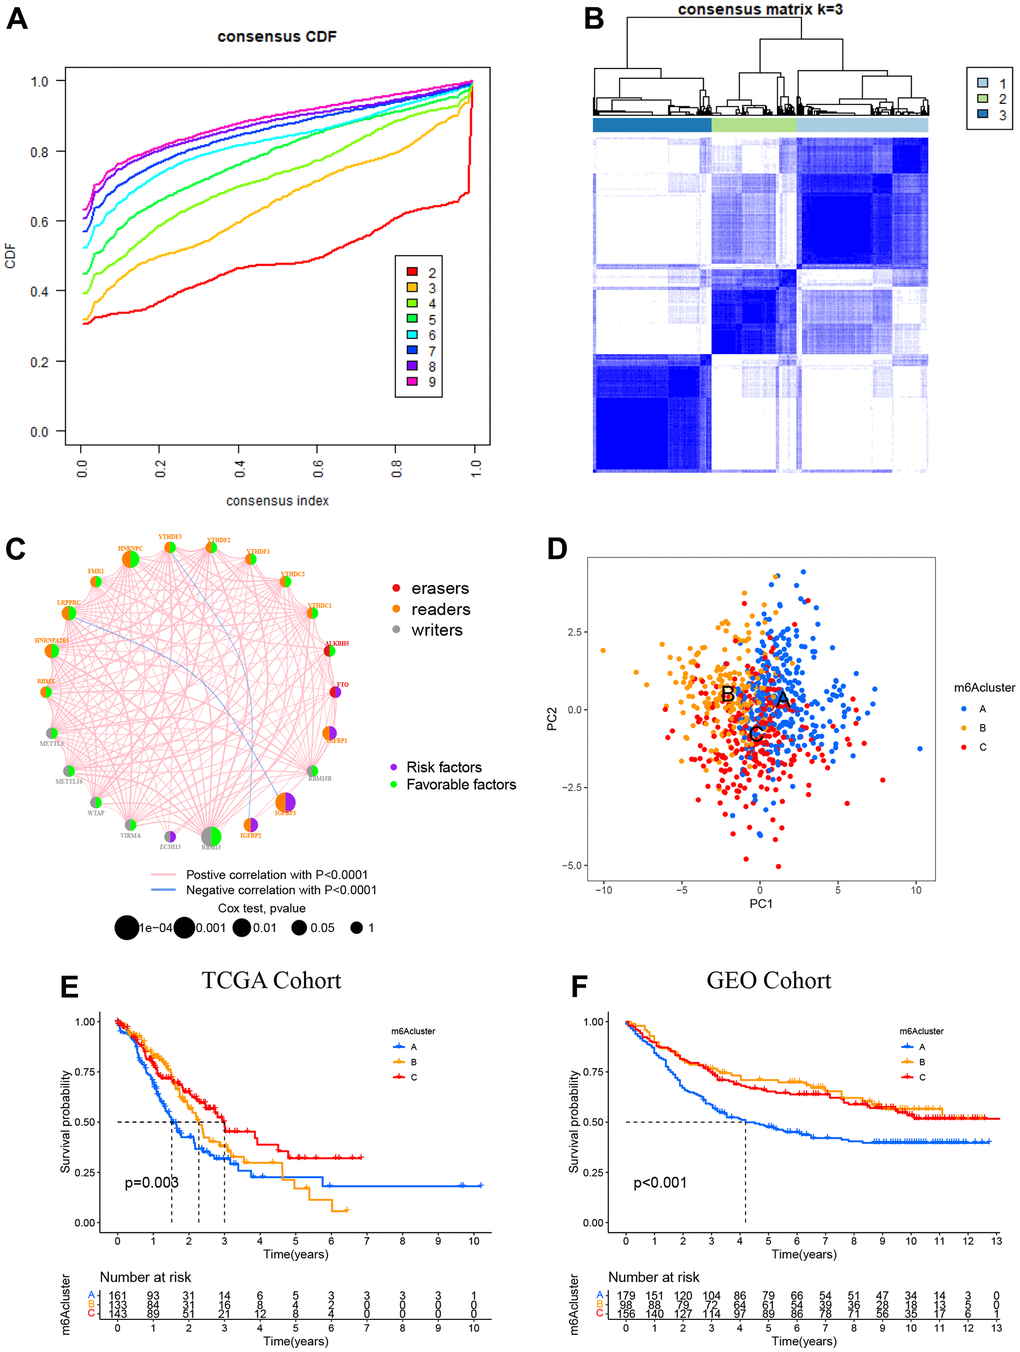 Patterns of m6A methylation modification. (A) CDF (cumulative distribution function; k = 2–9) in the right panel. (B) Depending on the consensus clustering matrix (k = 3), the patients with STAD were classified into three clusters. (C) Interactions among 22 m6A regulators in STAD. Circles in varying colors were used to represent differing RNA modifications, where red indicated Erasers, orange indicated readers, and gray indicated writers. Besides, green and purple circles, respectively, referred to the favorable and risky factors. (D) PCA (principal component analysis)-based map depicting prominent differences among the three m6A clusters. (E) Kaplan–Meier OS (overall survival) plots of 3 m6A clusters for the TCGA cohort (p = 0.003). (F) Kaplan–Meier OS plots of three m6A clusters for the GEO cohort (p 6A cluster C as compared to the other 2 clusters.